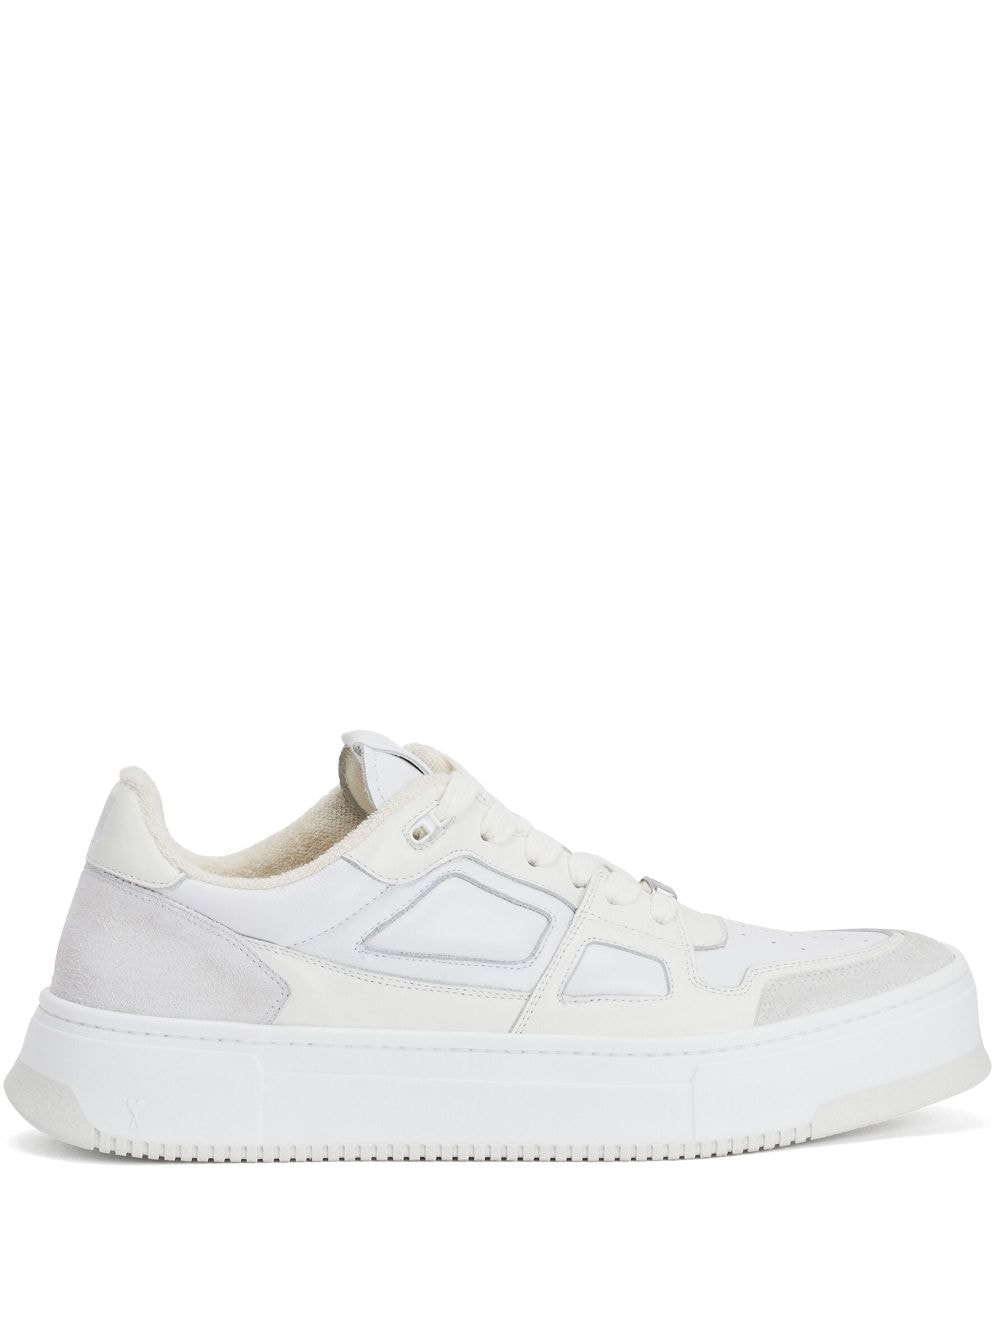 Ami Alexandre Mattiussi Lace-up Low-top Sneakers In White